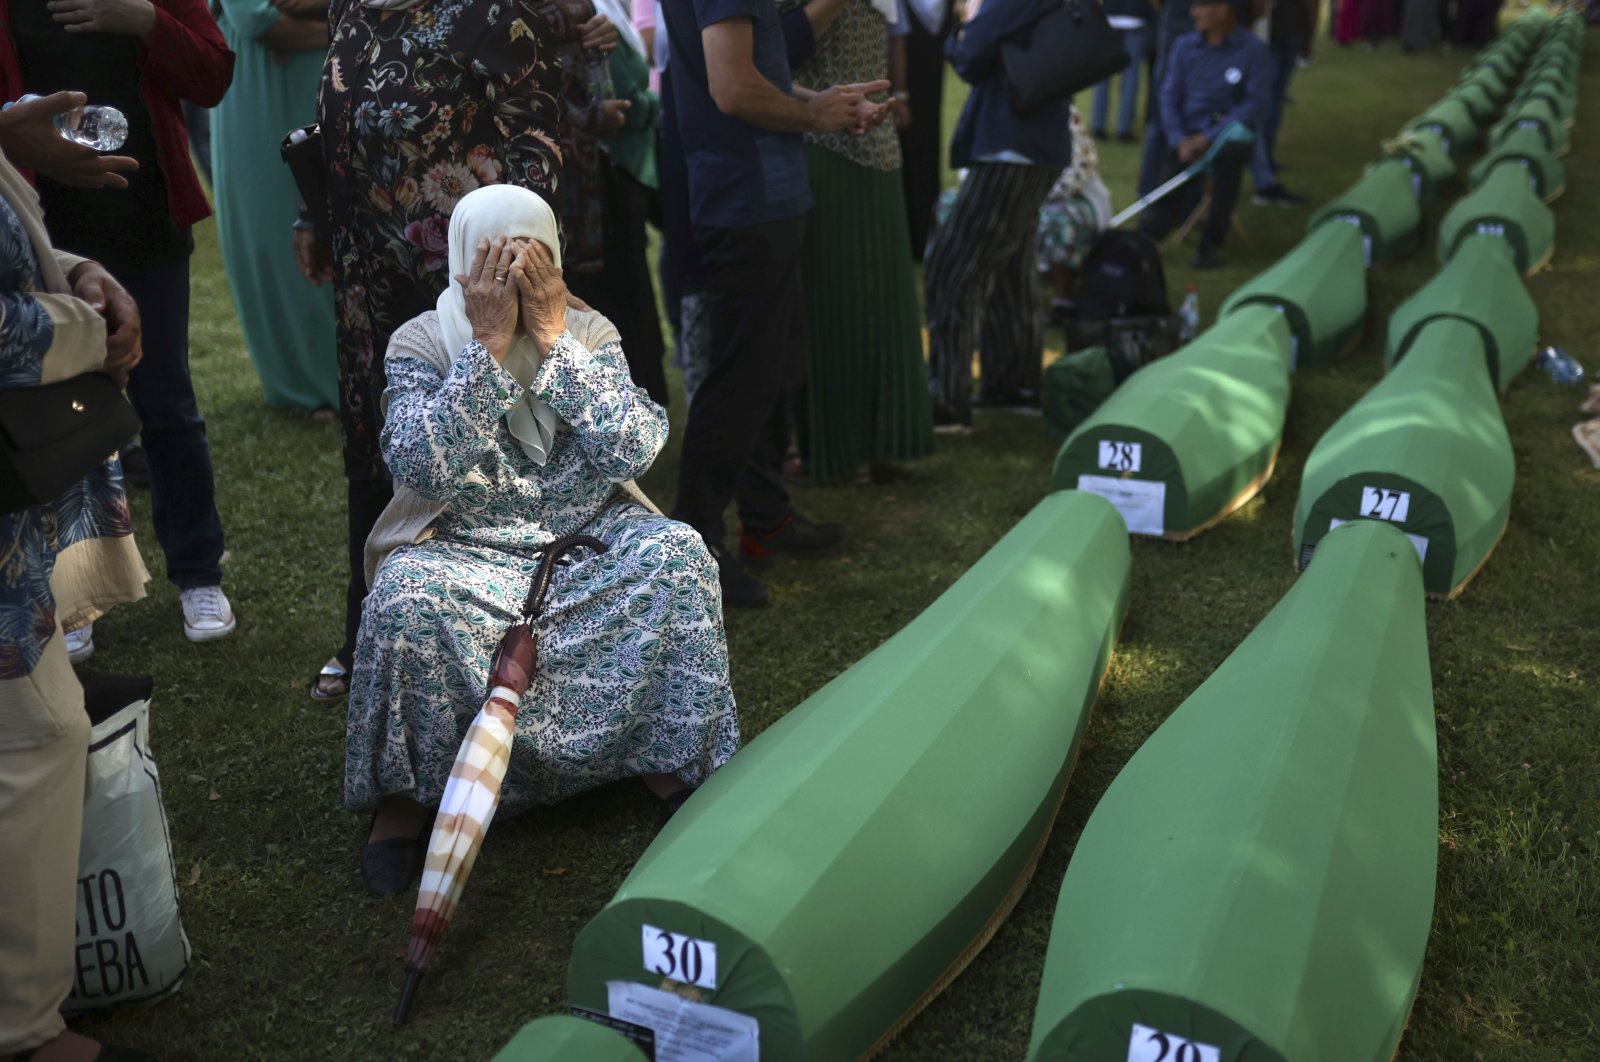 A Bosnian Muslim woman mourns next to the coffin containing remains of her husband who is among 50 newly identified victims of Srebrenica Genocide in Potocari, Bosnia-Herzegovina, July 11, 2022. (AP Photo)